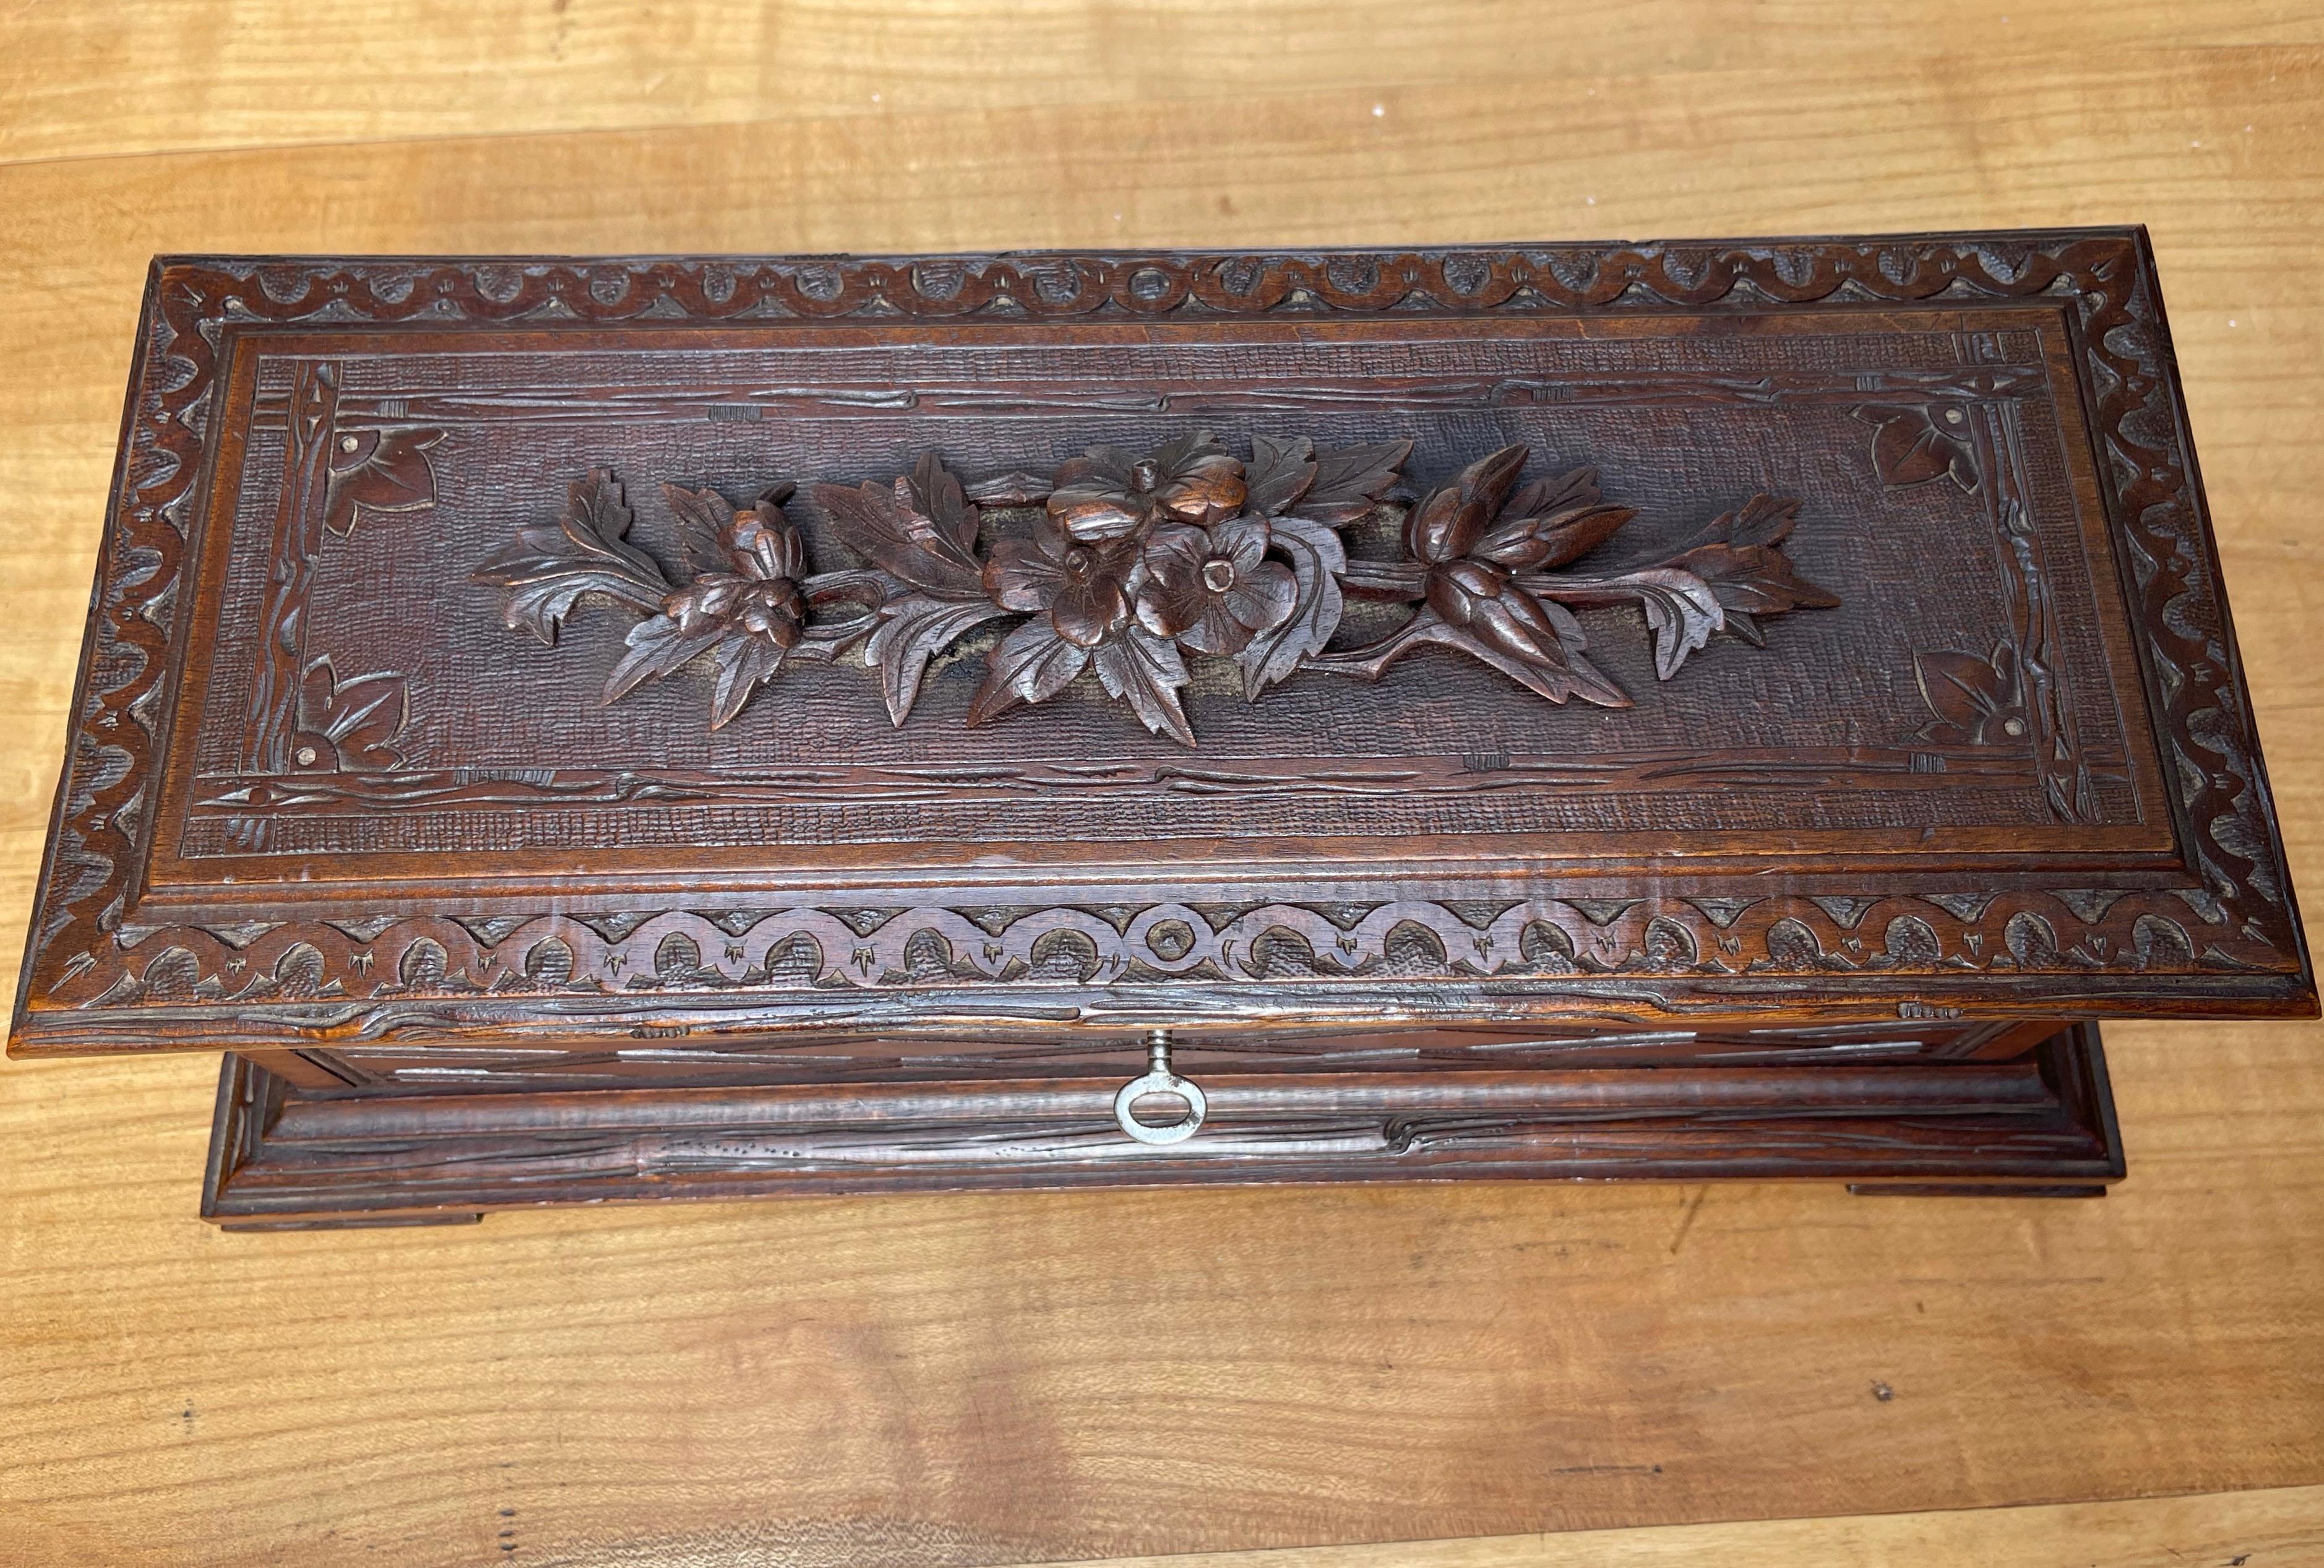 Hand-Carved Large Size & Great Quality Carved Jewelry, Treasure or Collecting Box / Casket For Sale